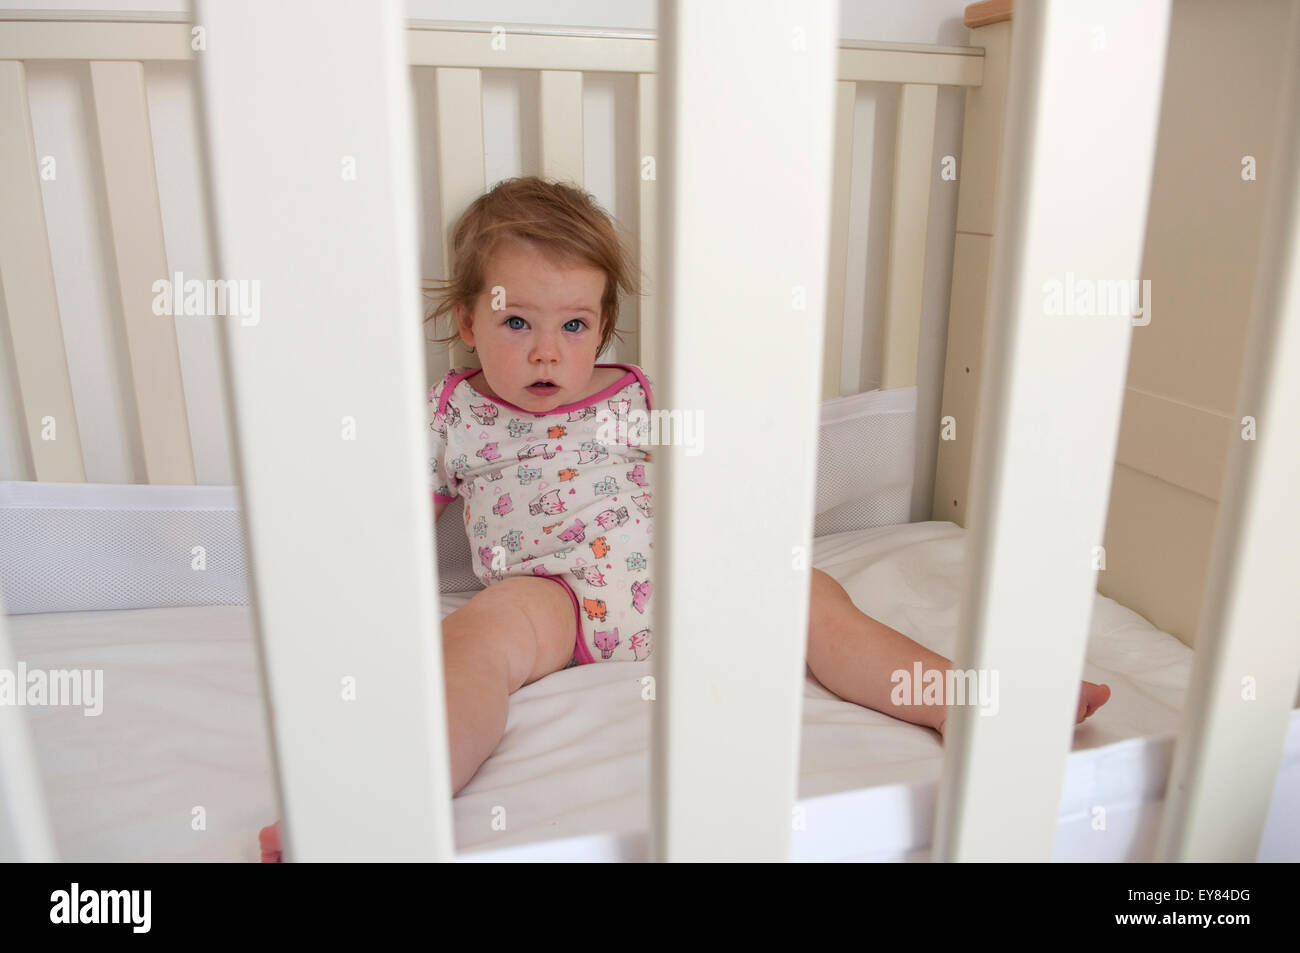 Baby girl looking through the bars of her cot looking apprehensive Stock Photo